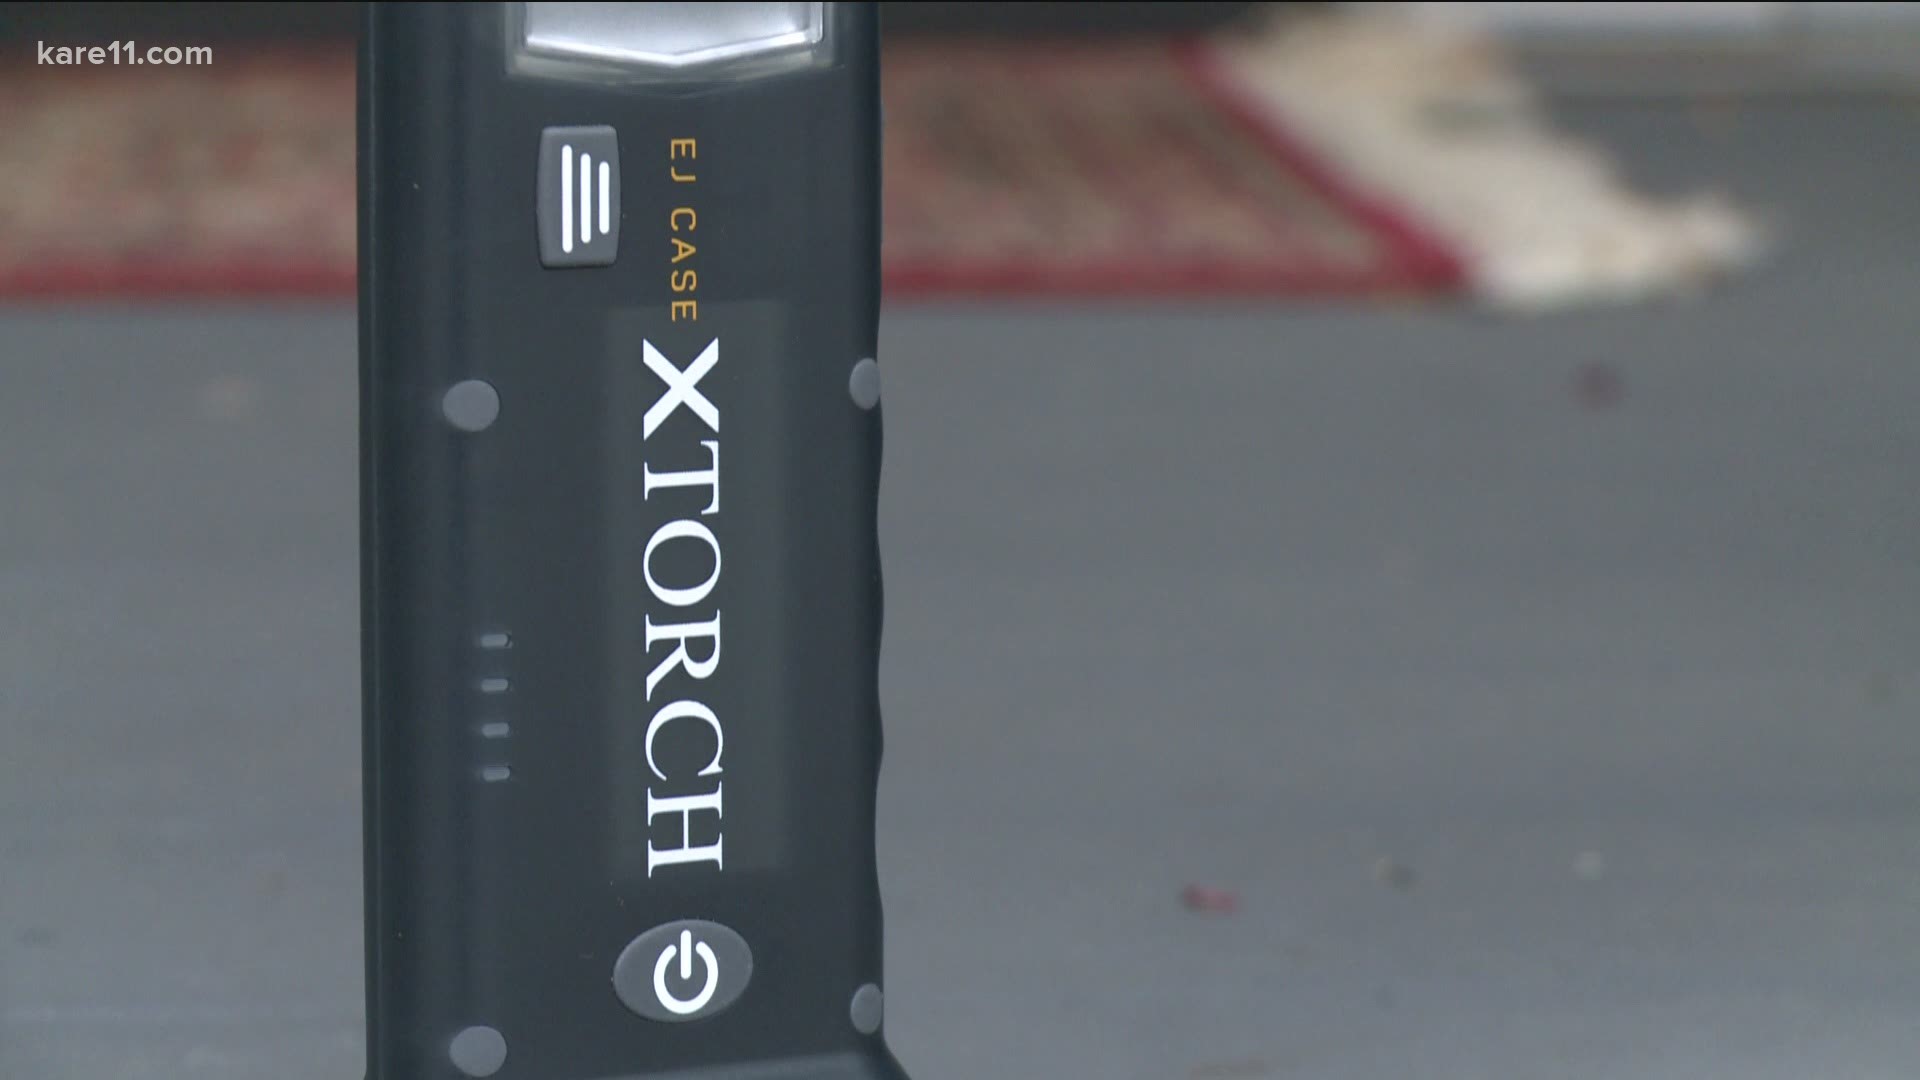 The XTorch is helping provide reliable light and power, especially to people in developing countries.